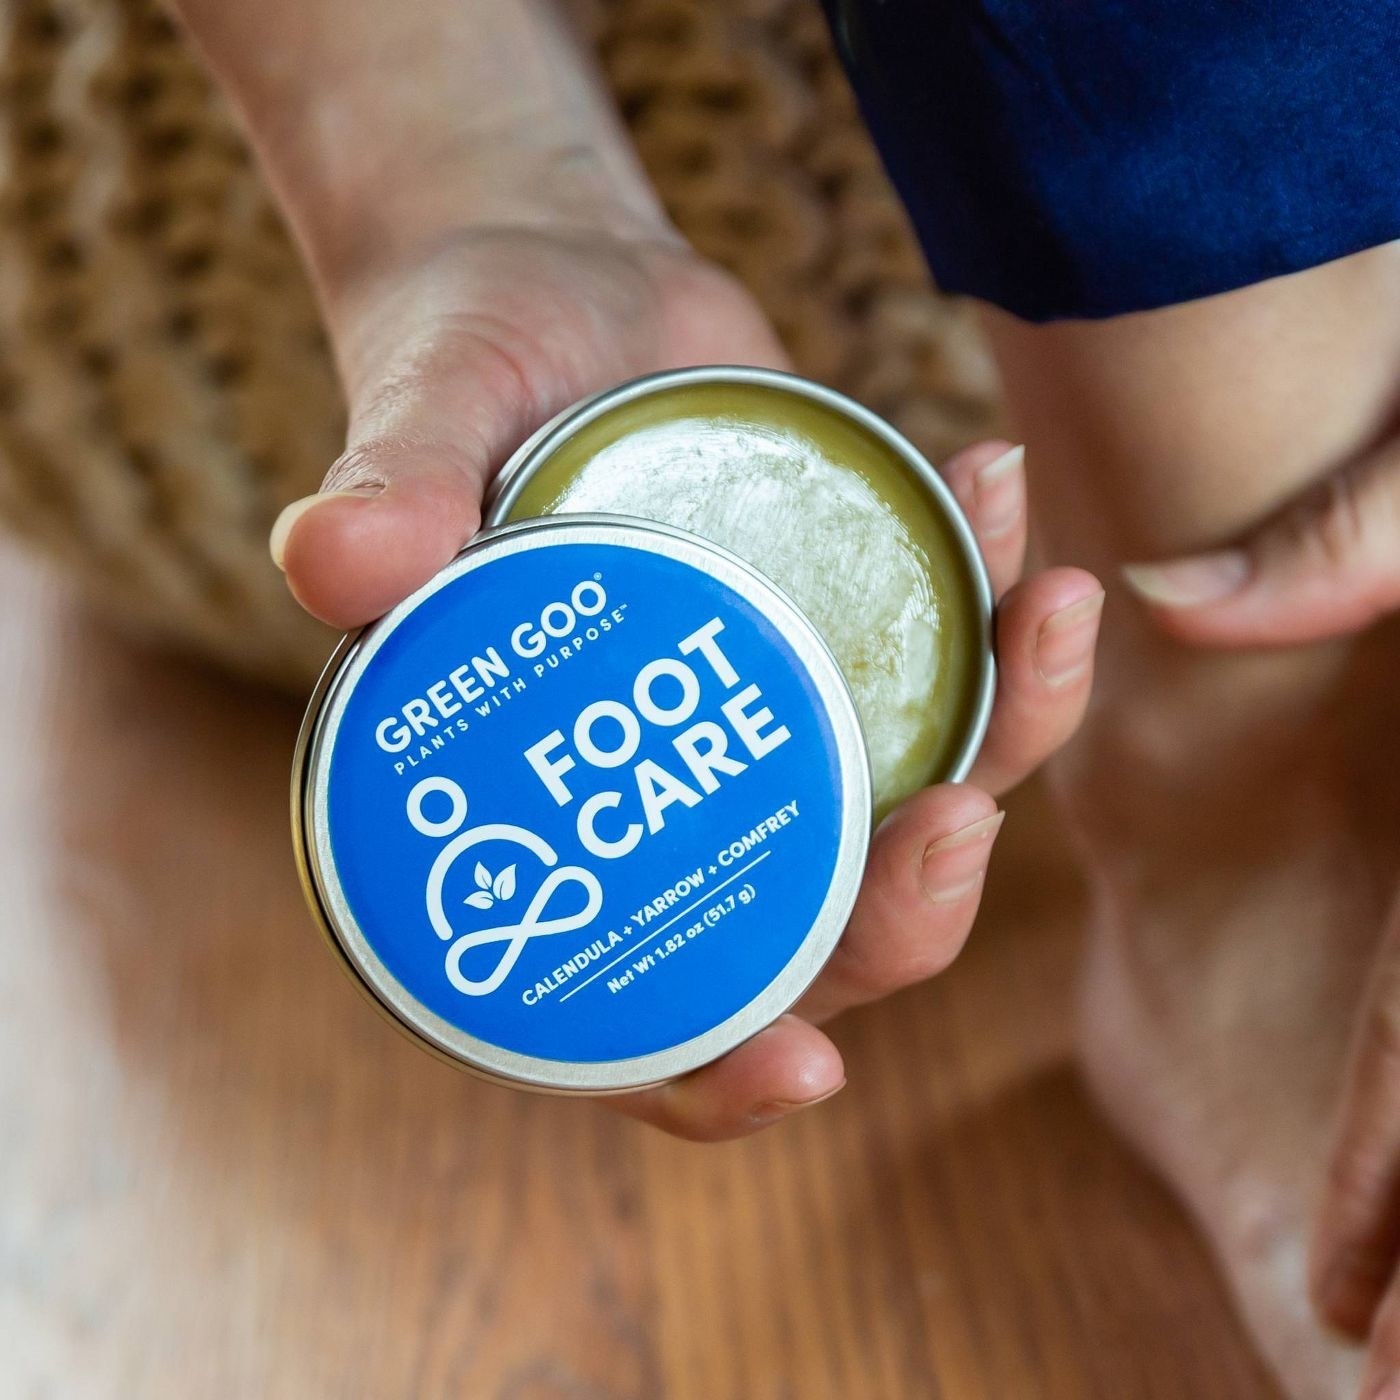 The foot care save